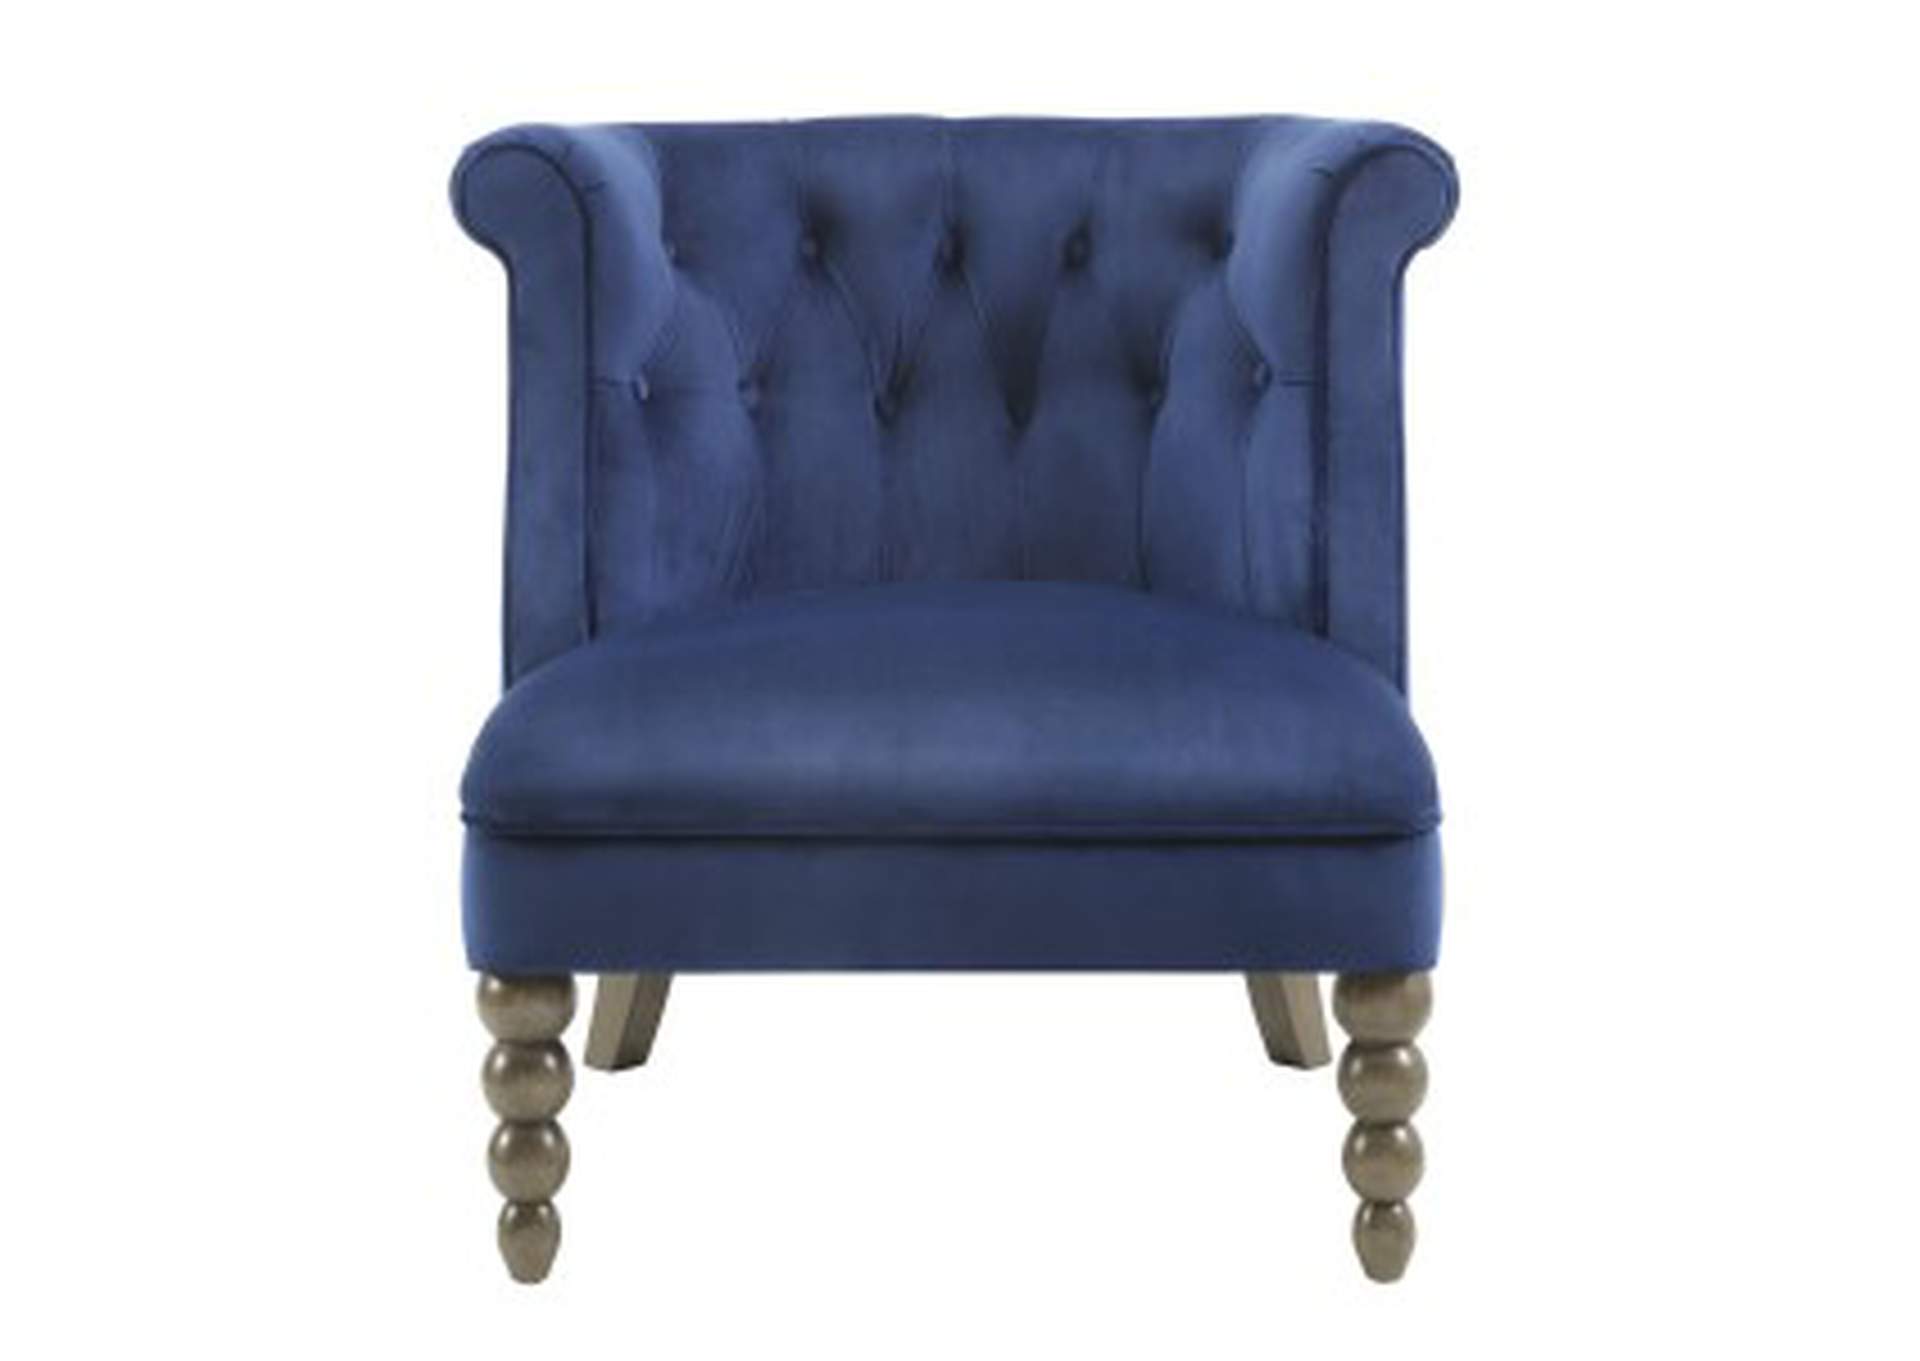 Odelle Accent Chair,Homelegance